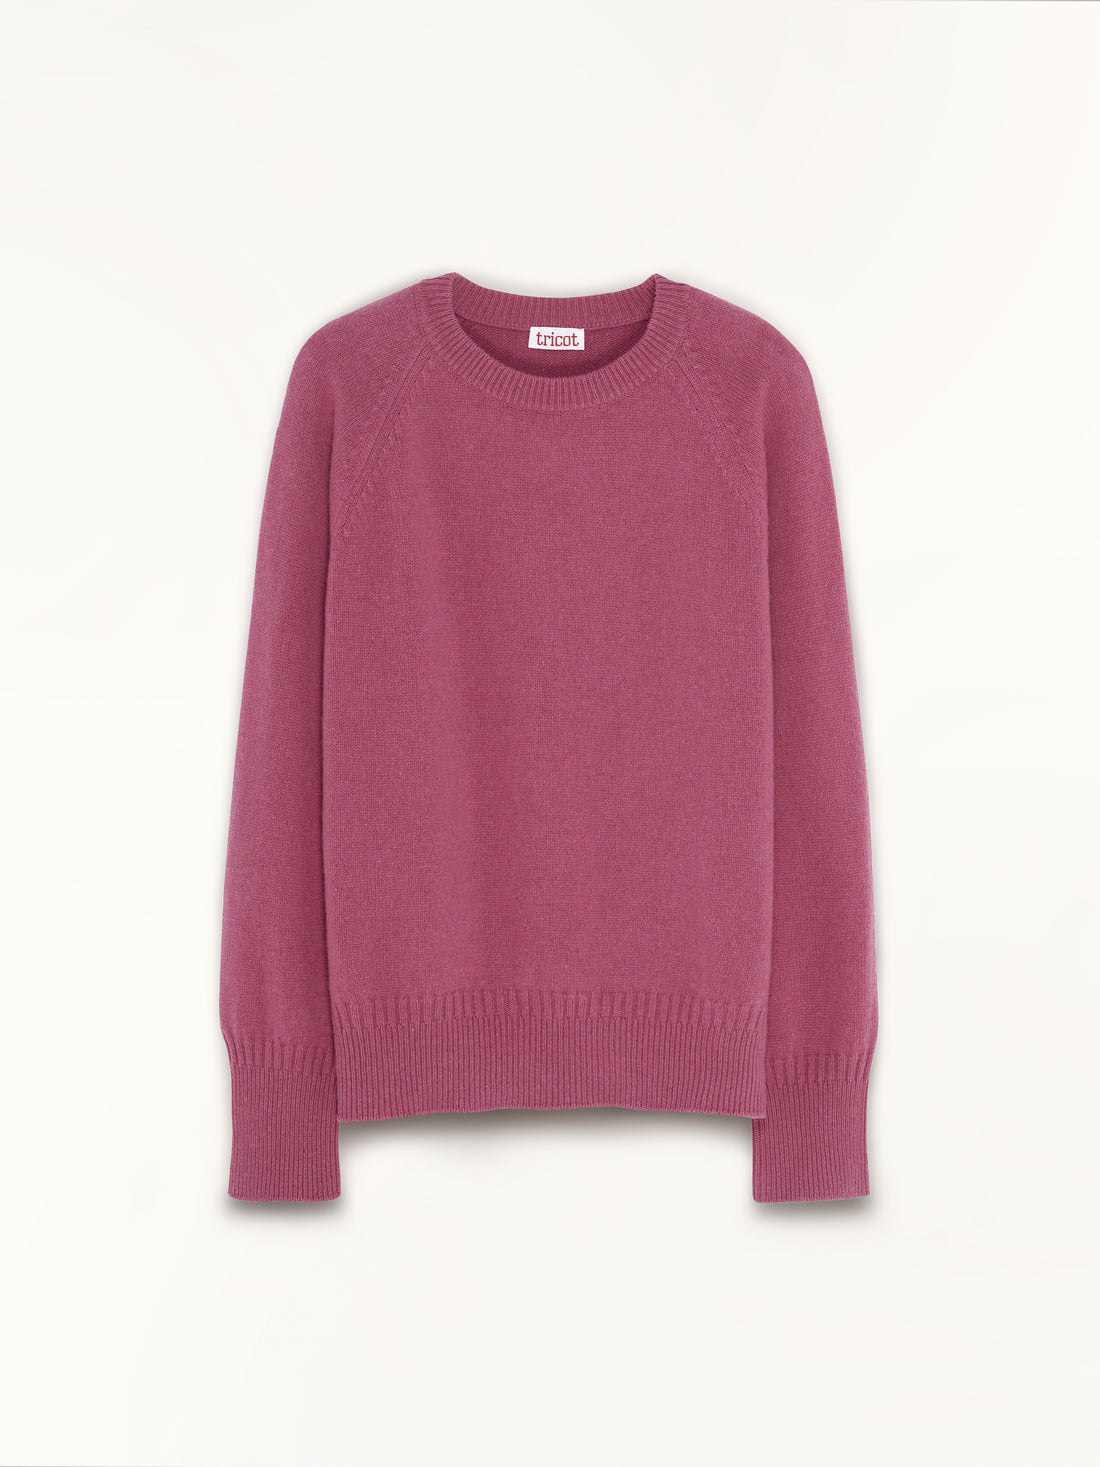 Men's crewneck cashmere sweater in Indian Pink